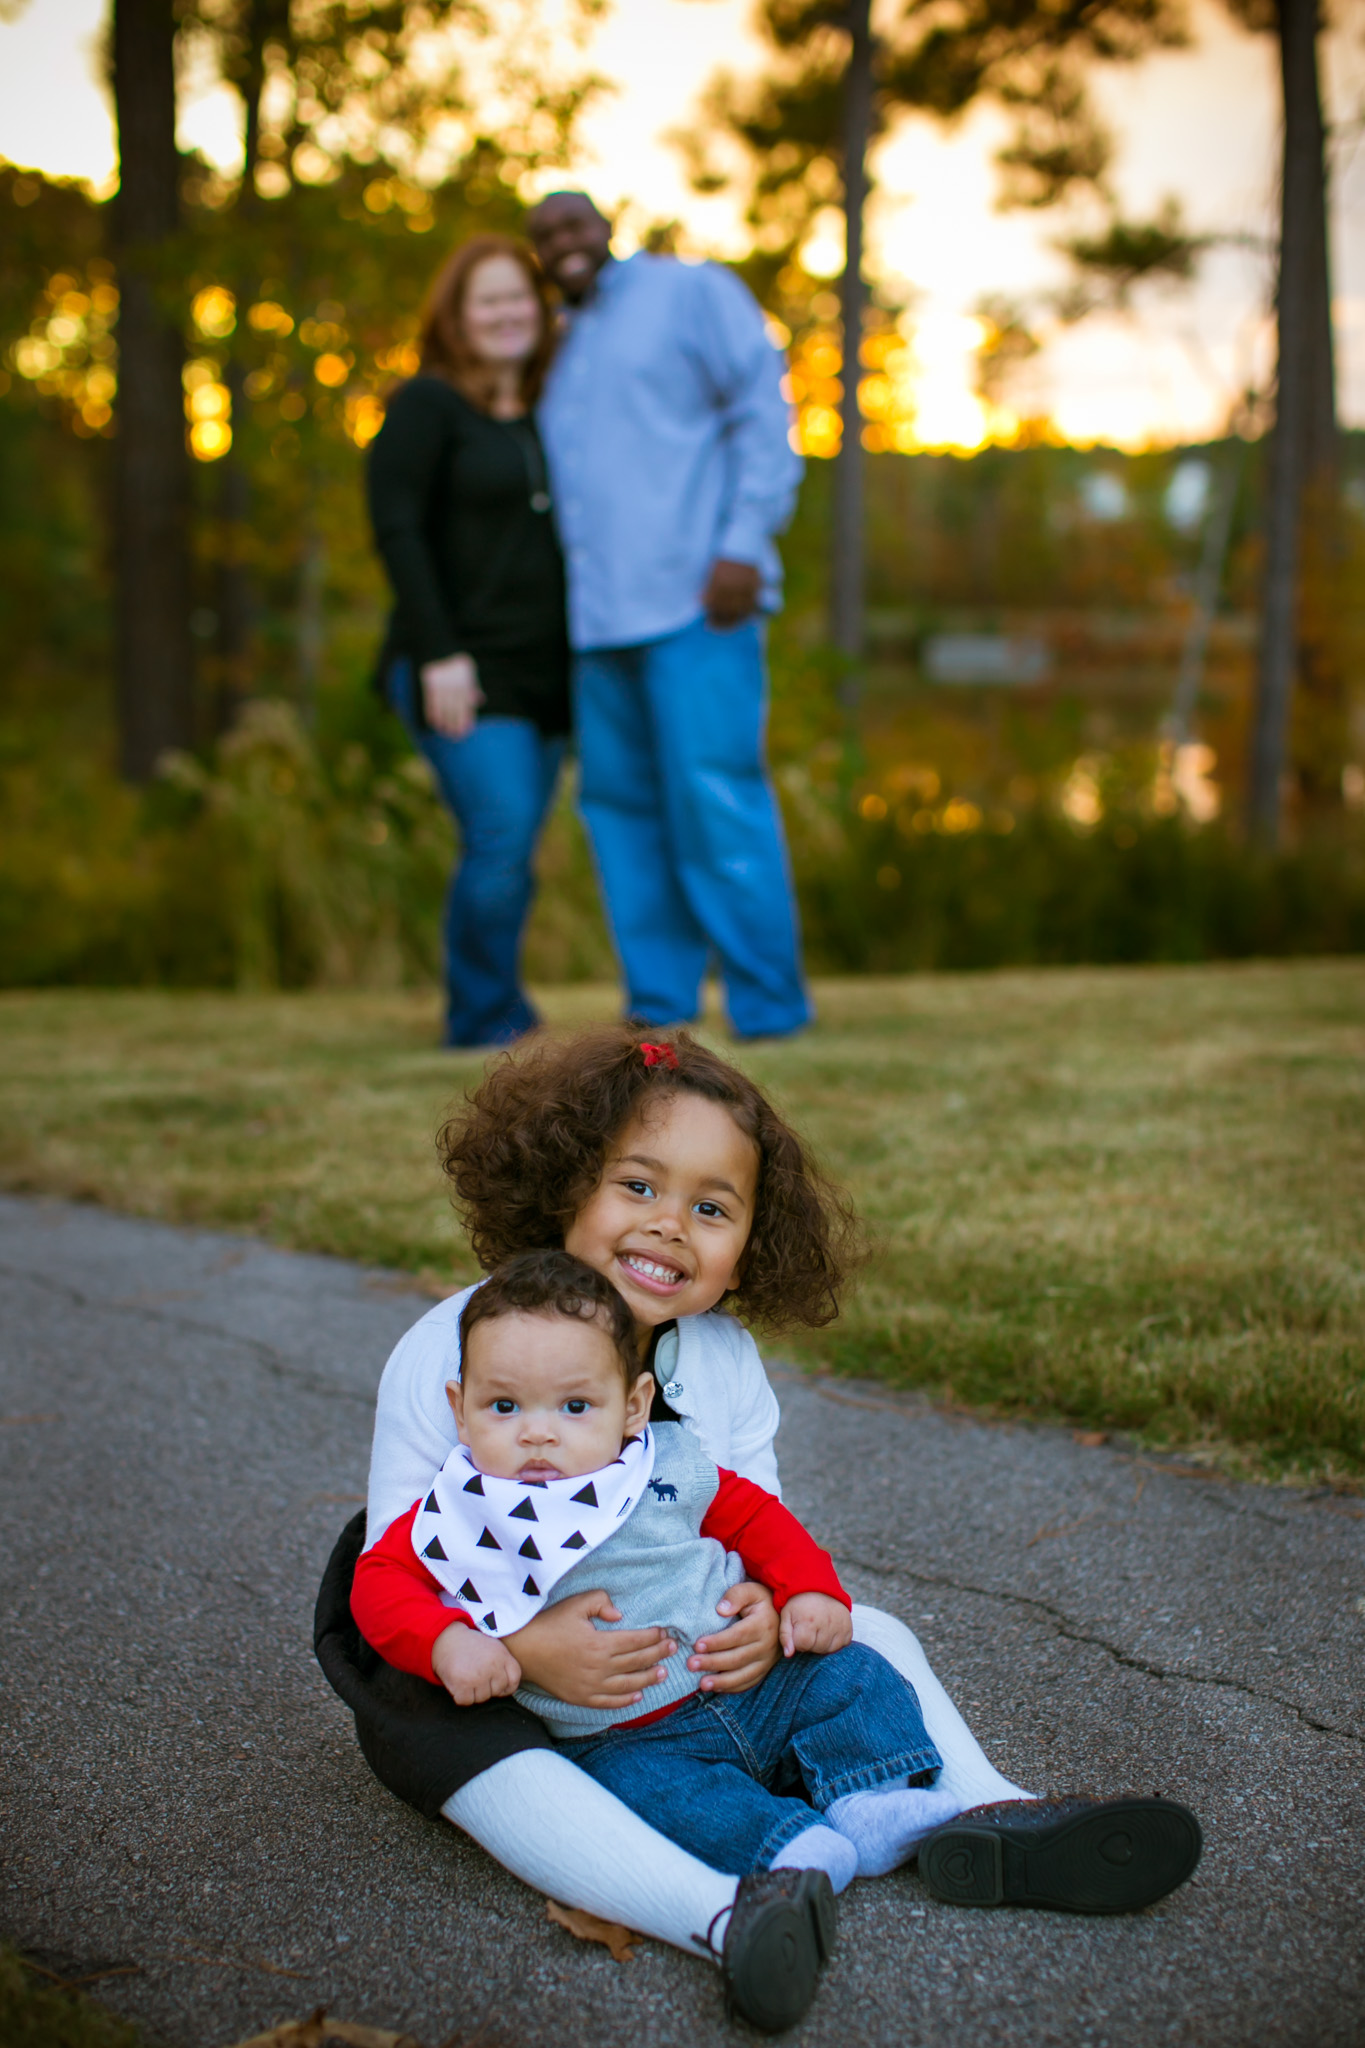 Durham Family Photographer | G. Lin Photography | Children sitting on ground in front of parents